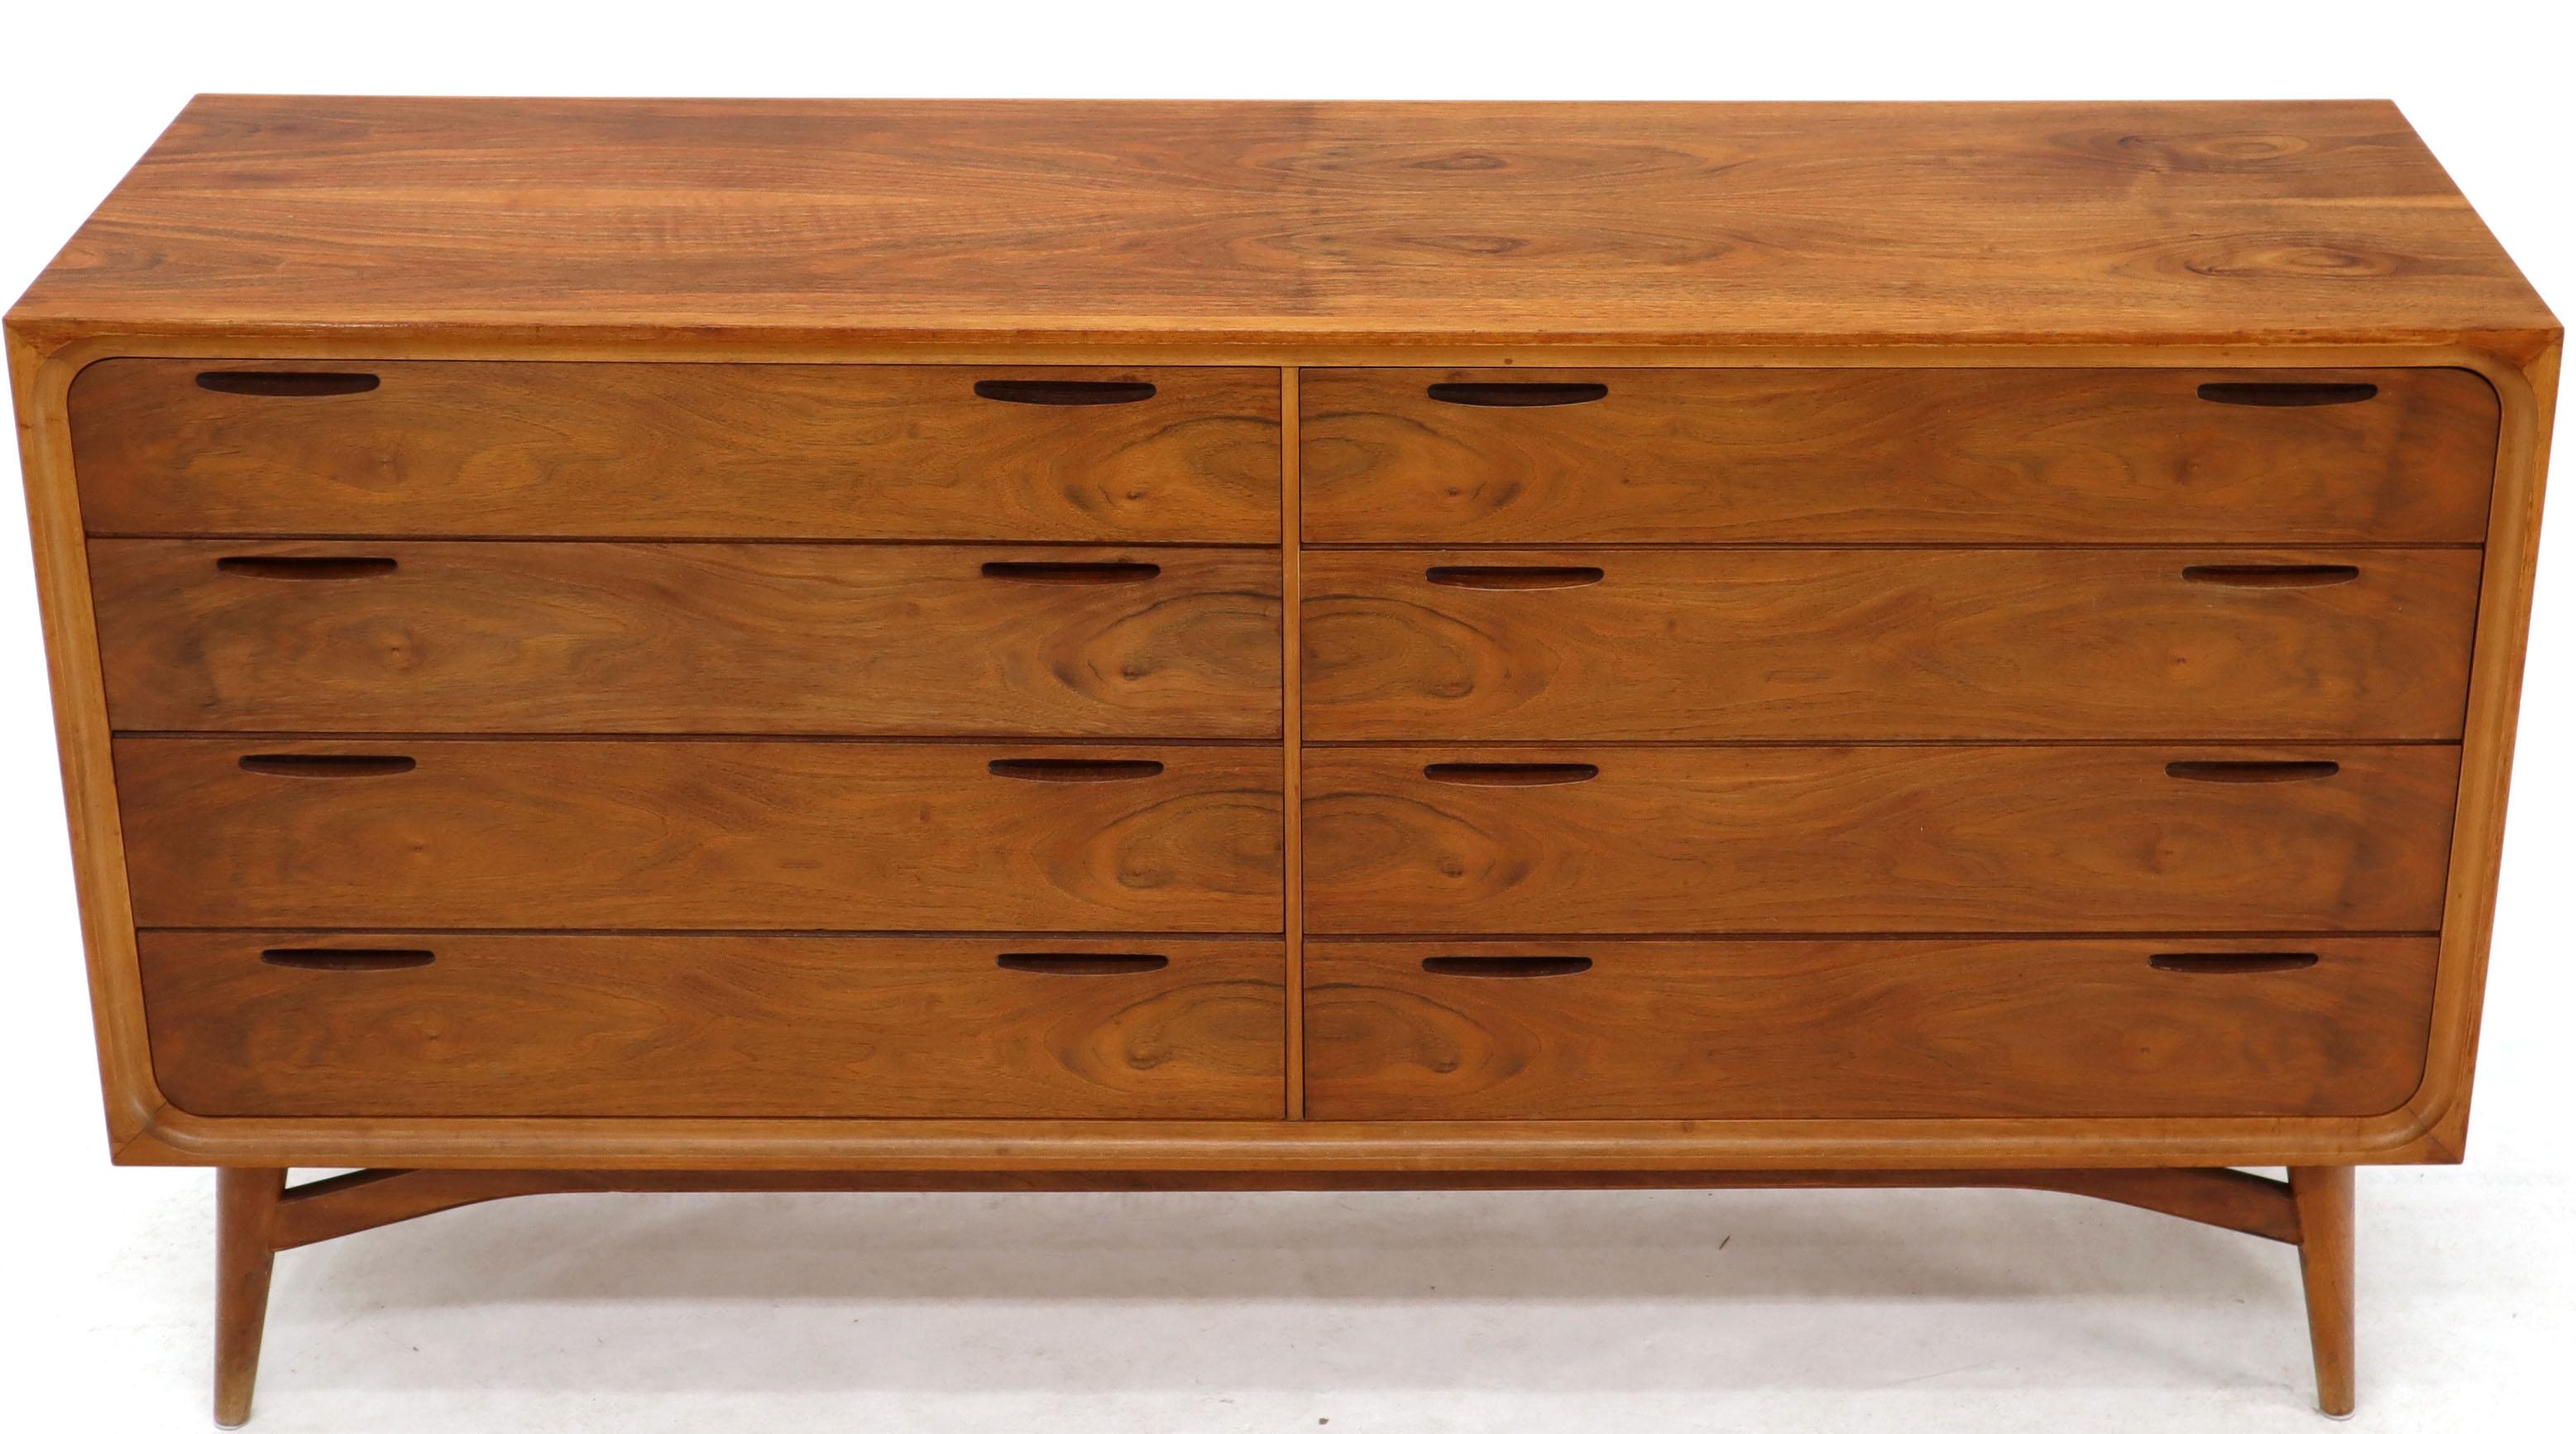 Danish or Swedish Mid-Century Modern 8 drawers double dresser credenza on tall tempered legs and finished back. Dramatic flame walnut wood grain pattern. Banana shape recessed pulls carved into solid walnut. In style of Edmund Spence and Kofoed